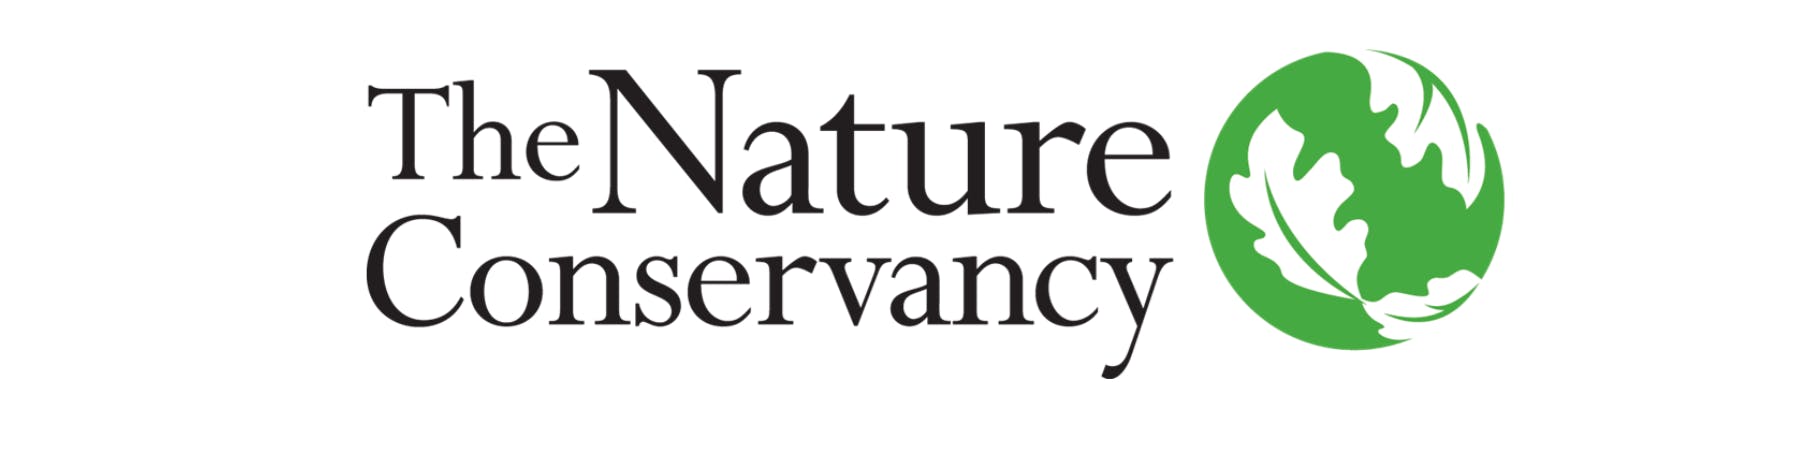 The logo for The Nature Conservancy. 